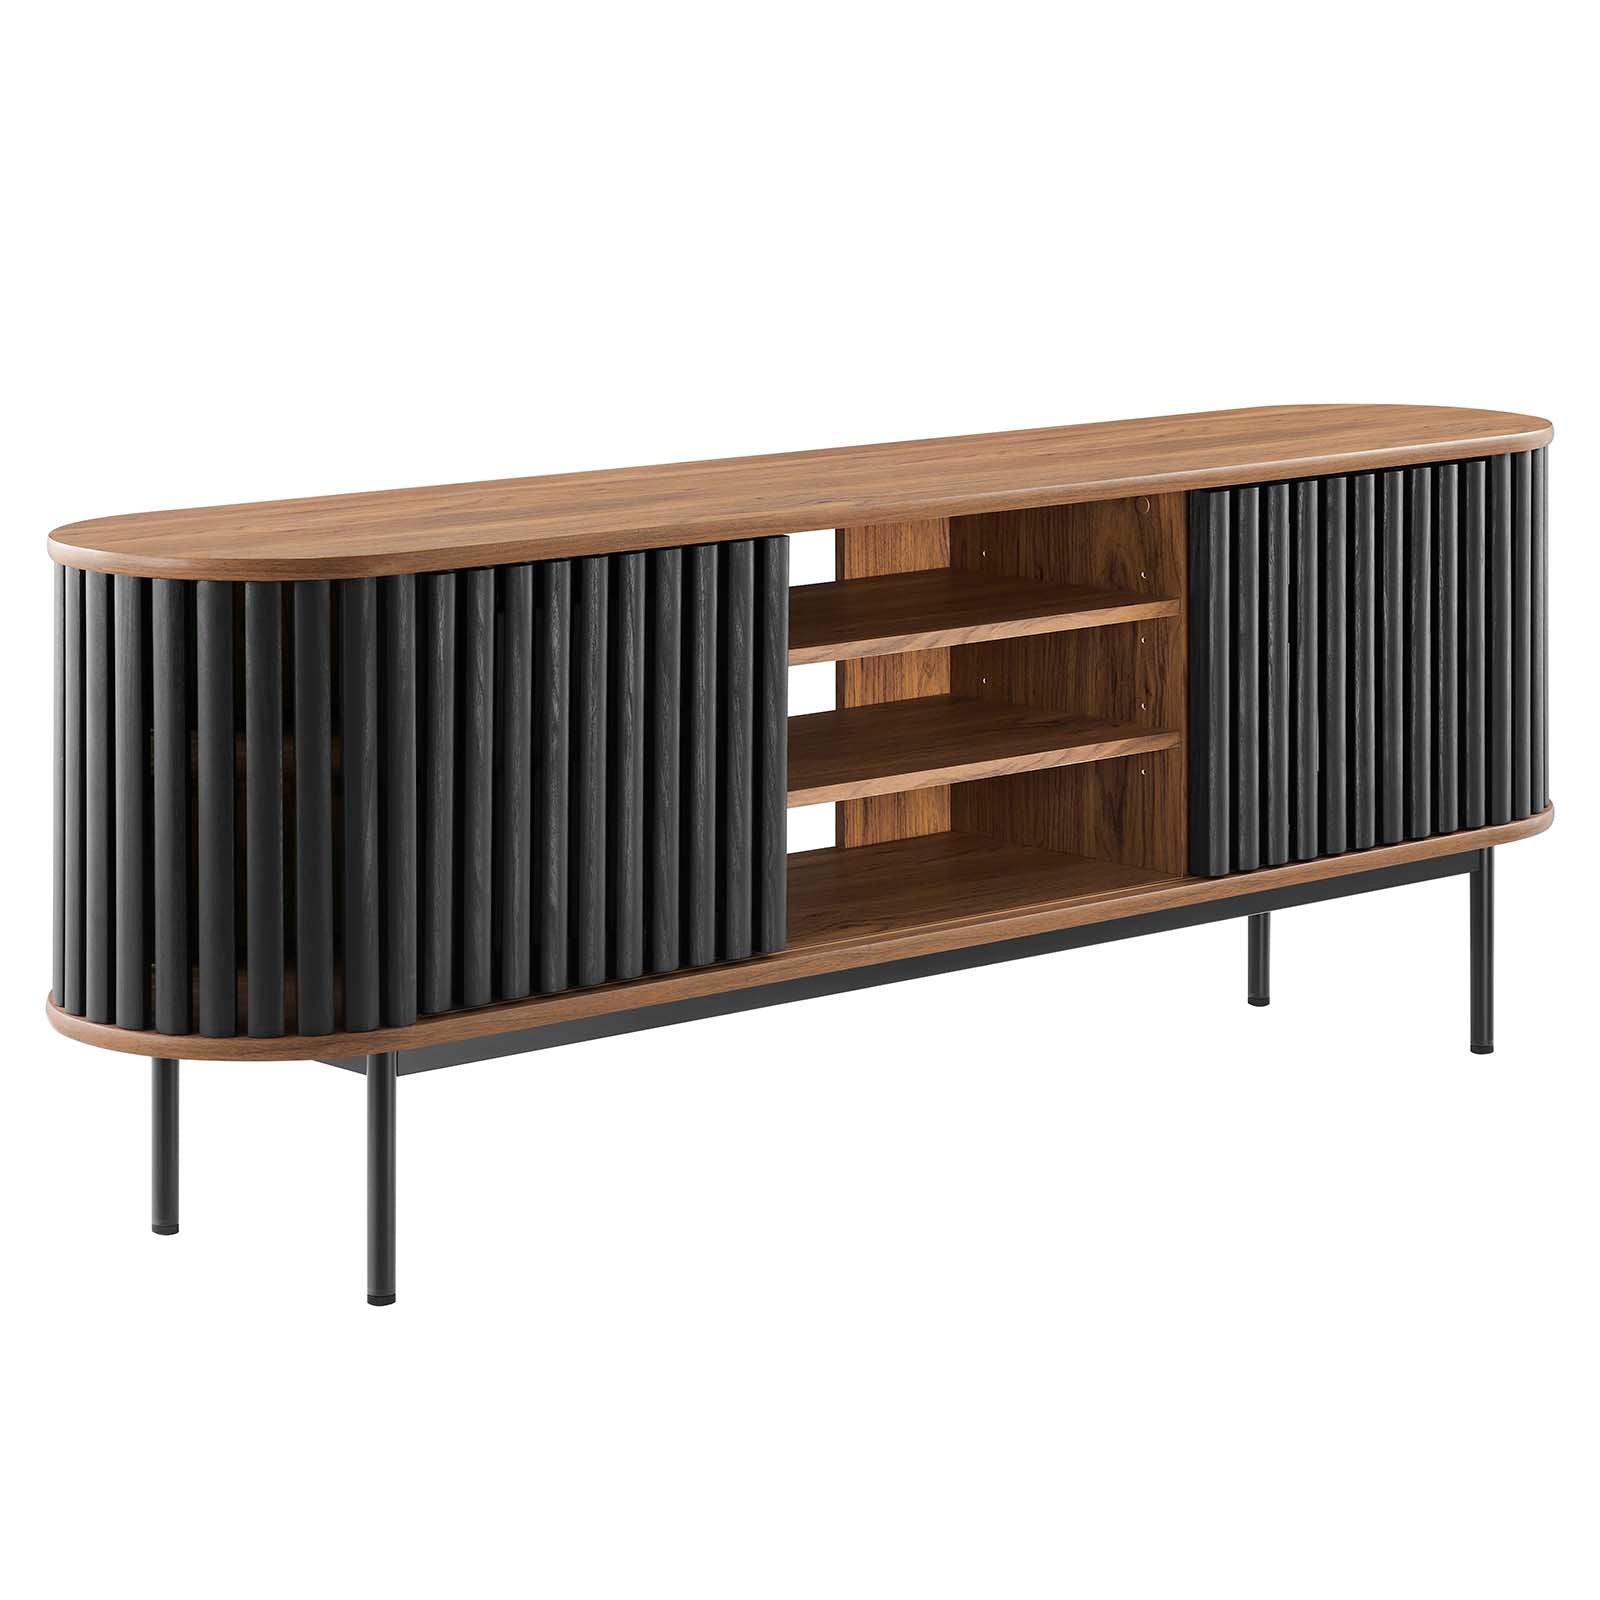 Fortitude 71" TV Stand - East Shore Modern Home Furnishings